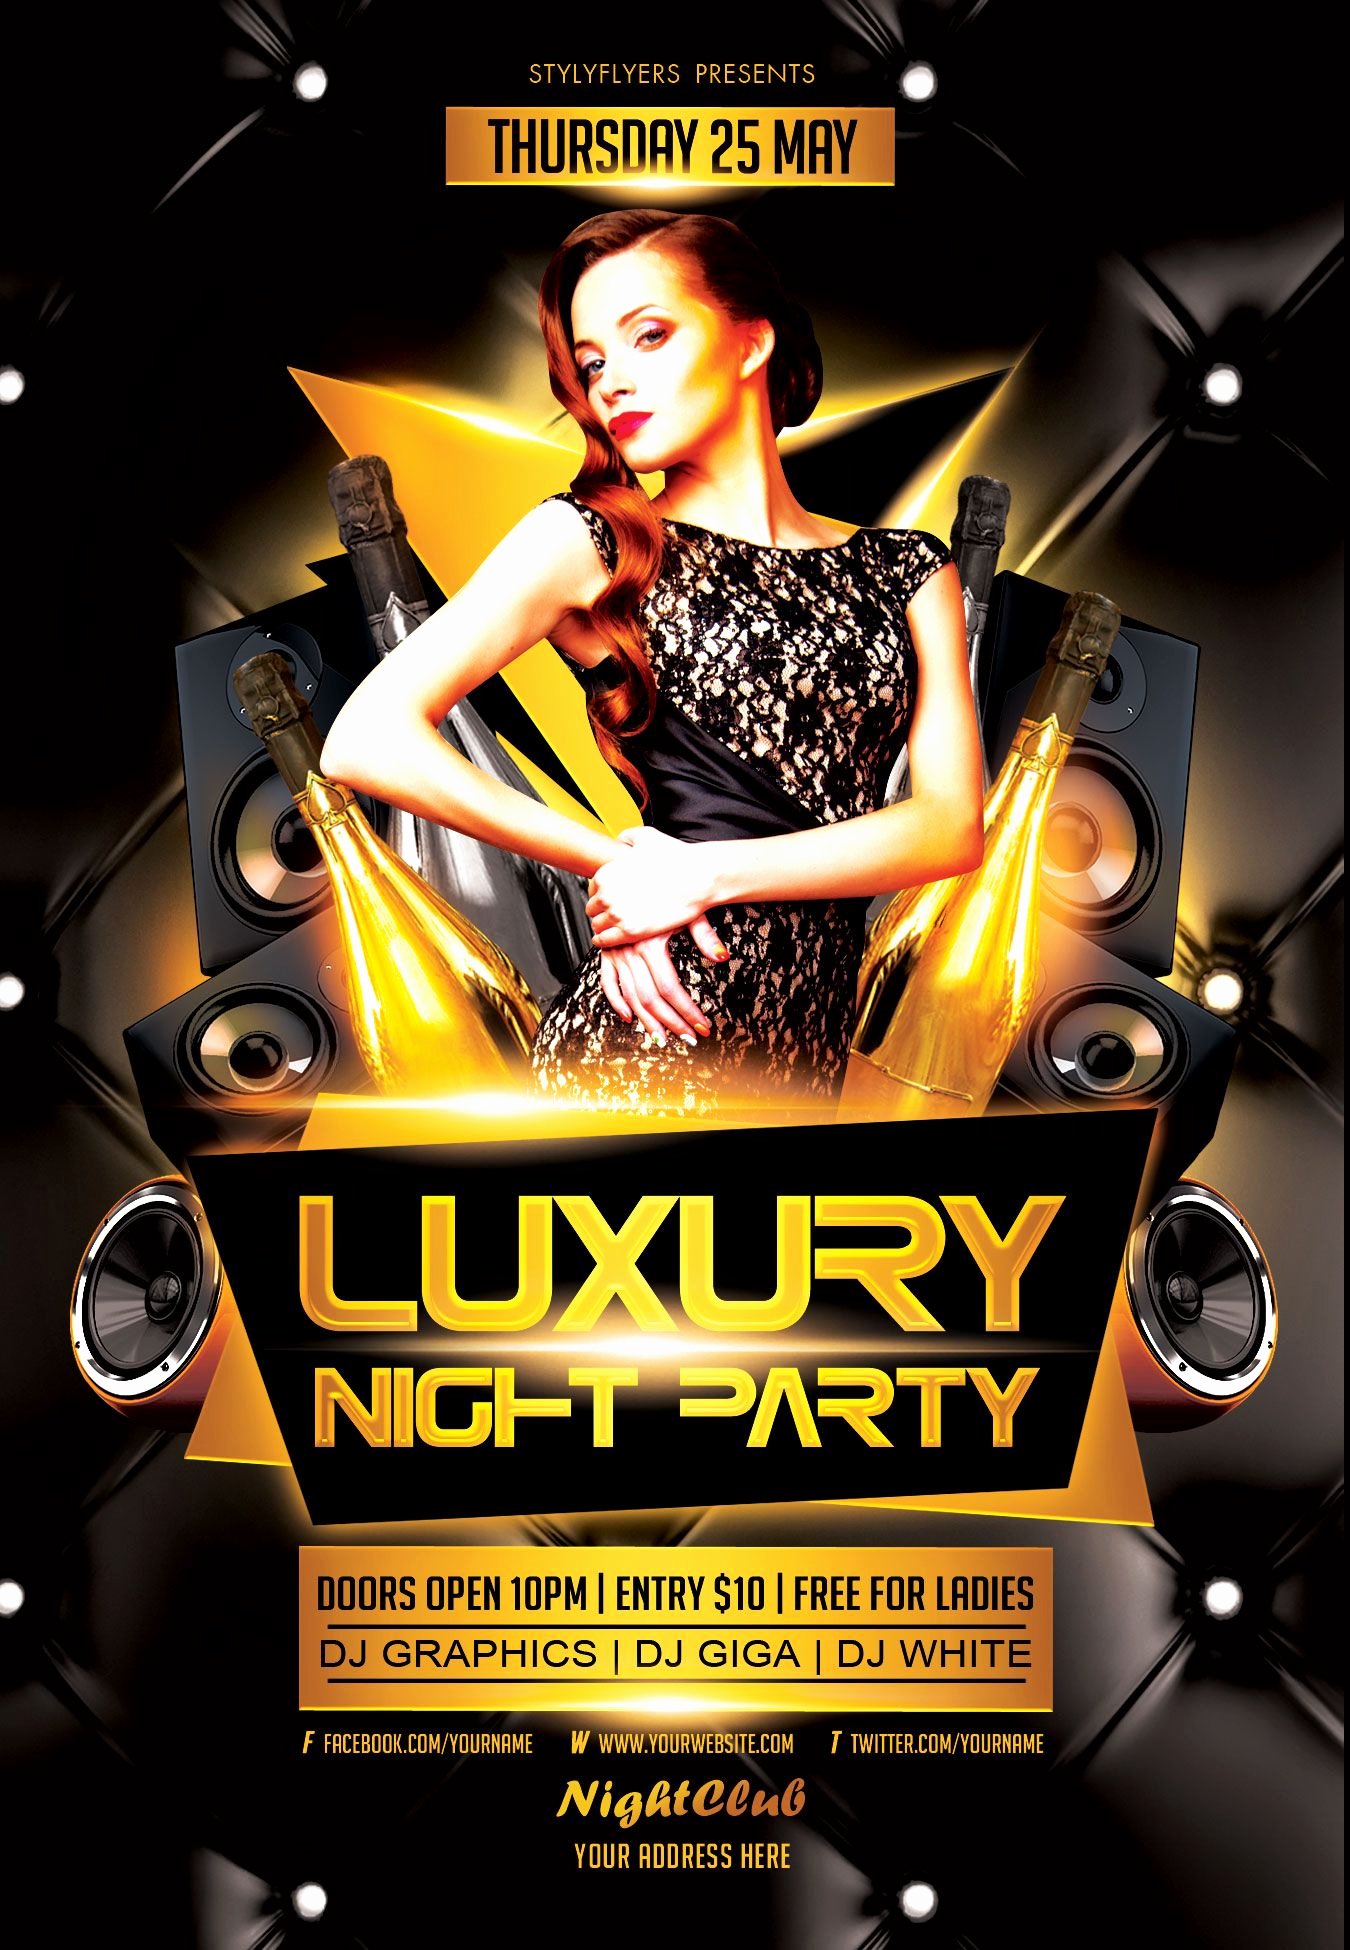 Free Luxury Night Party Flyer Psd Template by Styleflyer